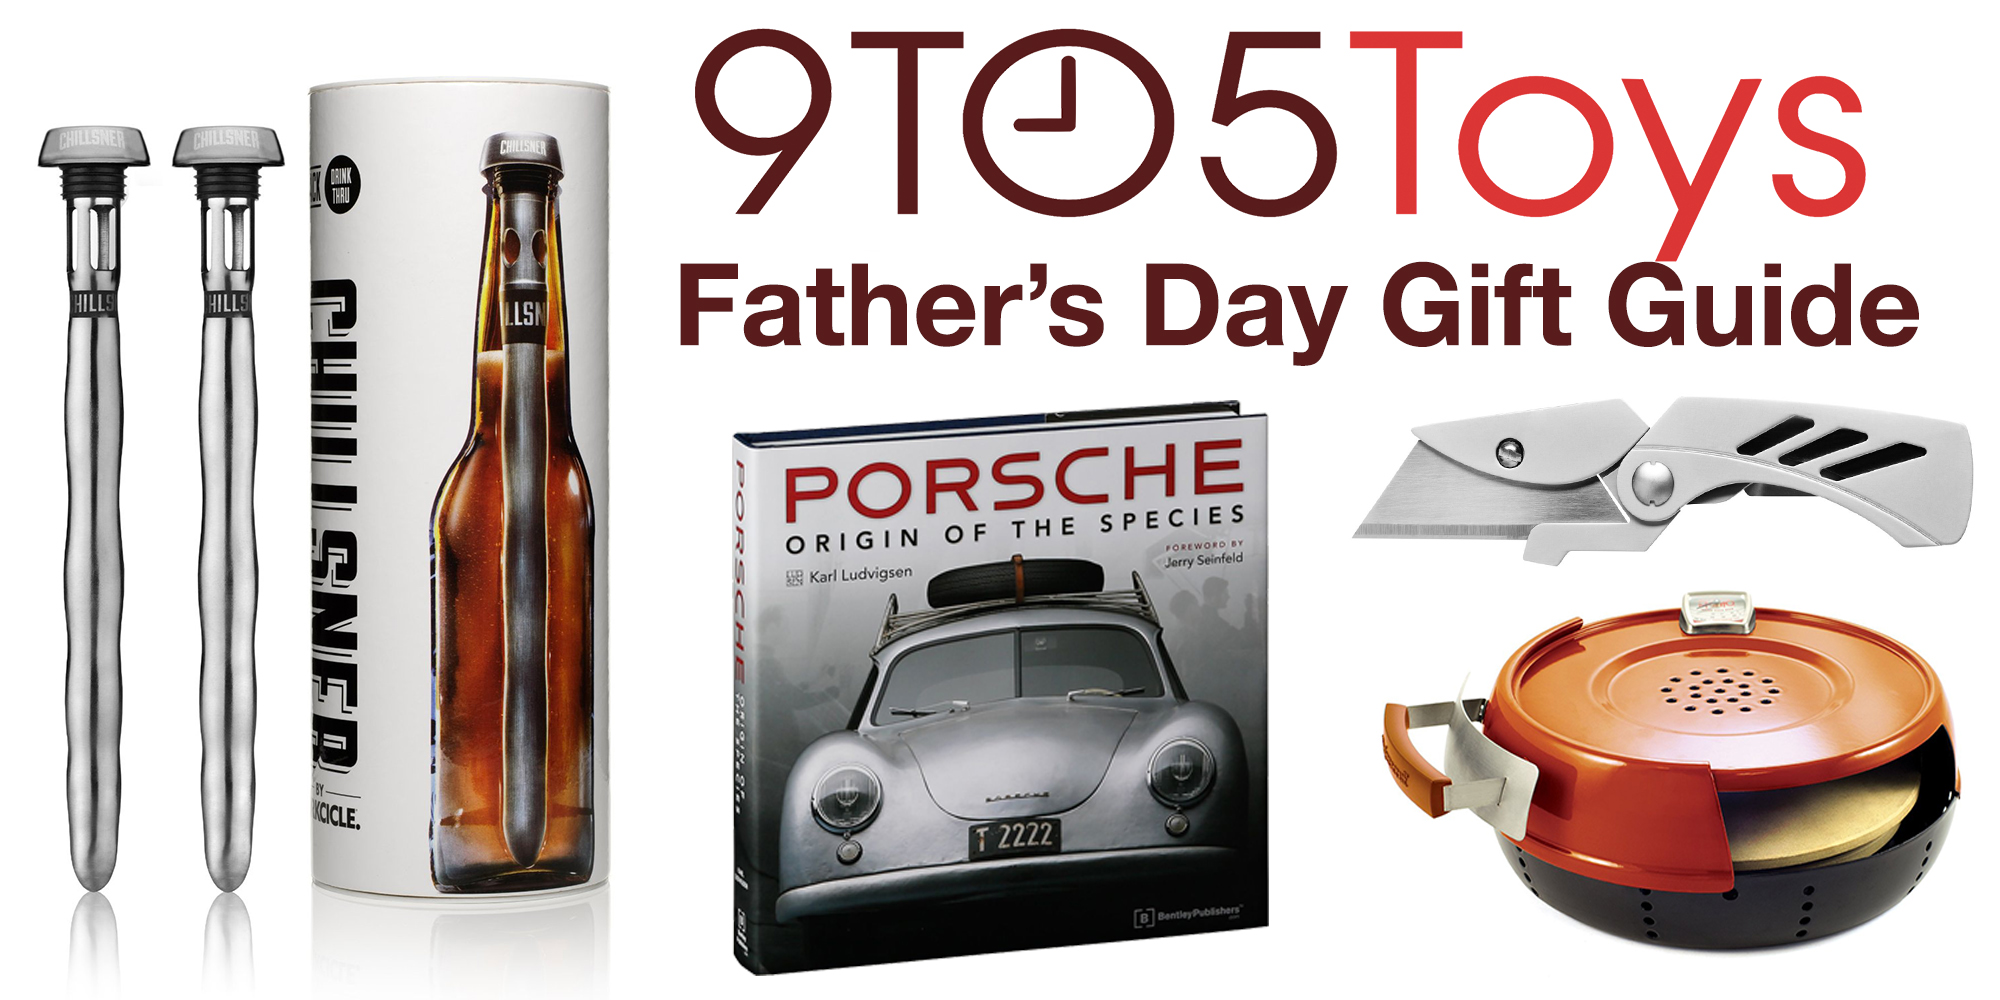 https://9to5toys.com/wp-content/uploads/sites/5/2016/06/9to5toys-fathers-day-gift-guide.jpg